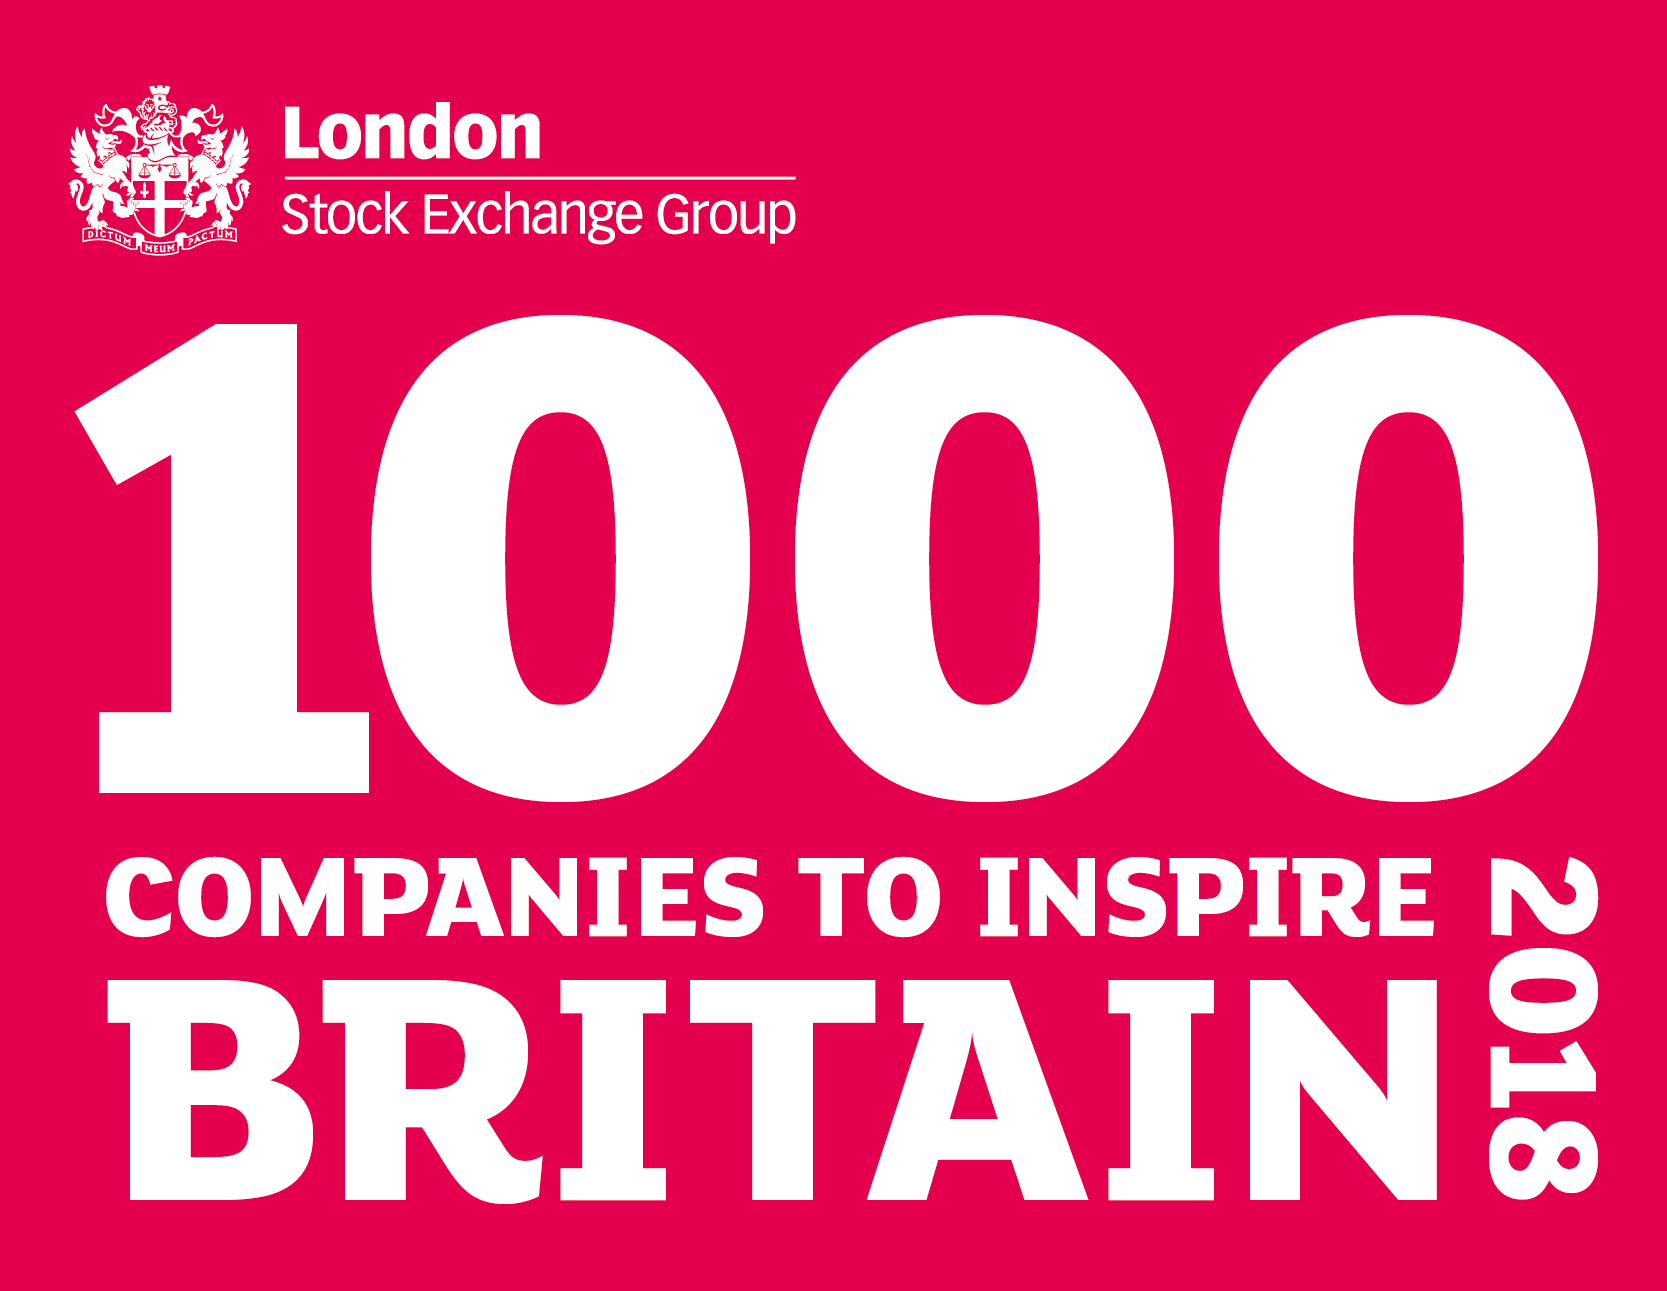 Roman featured in 1000 Companies to Inspire Britain 